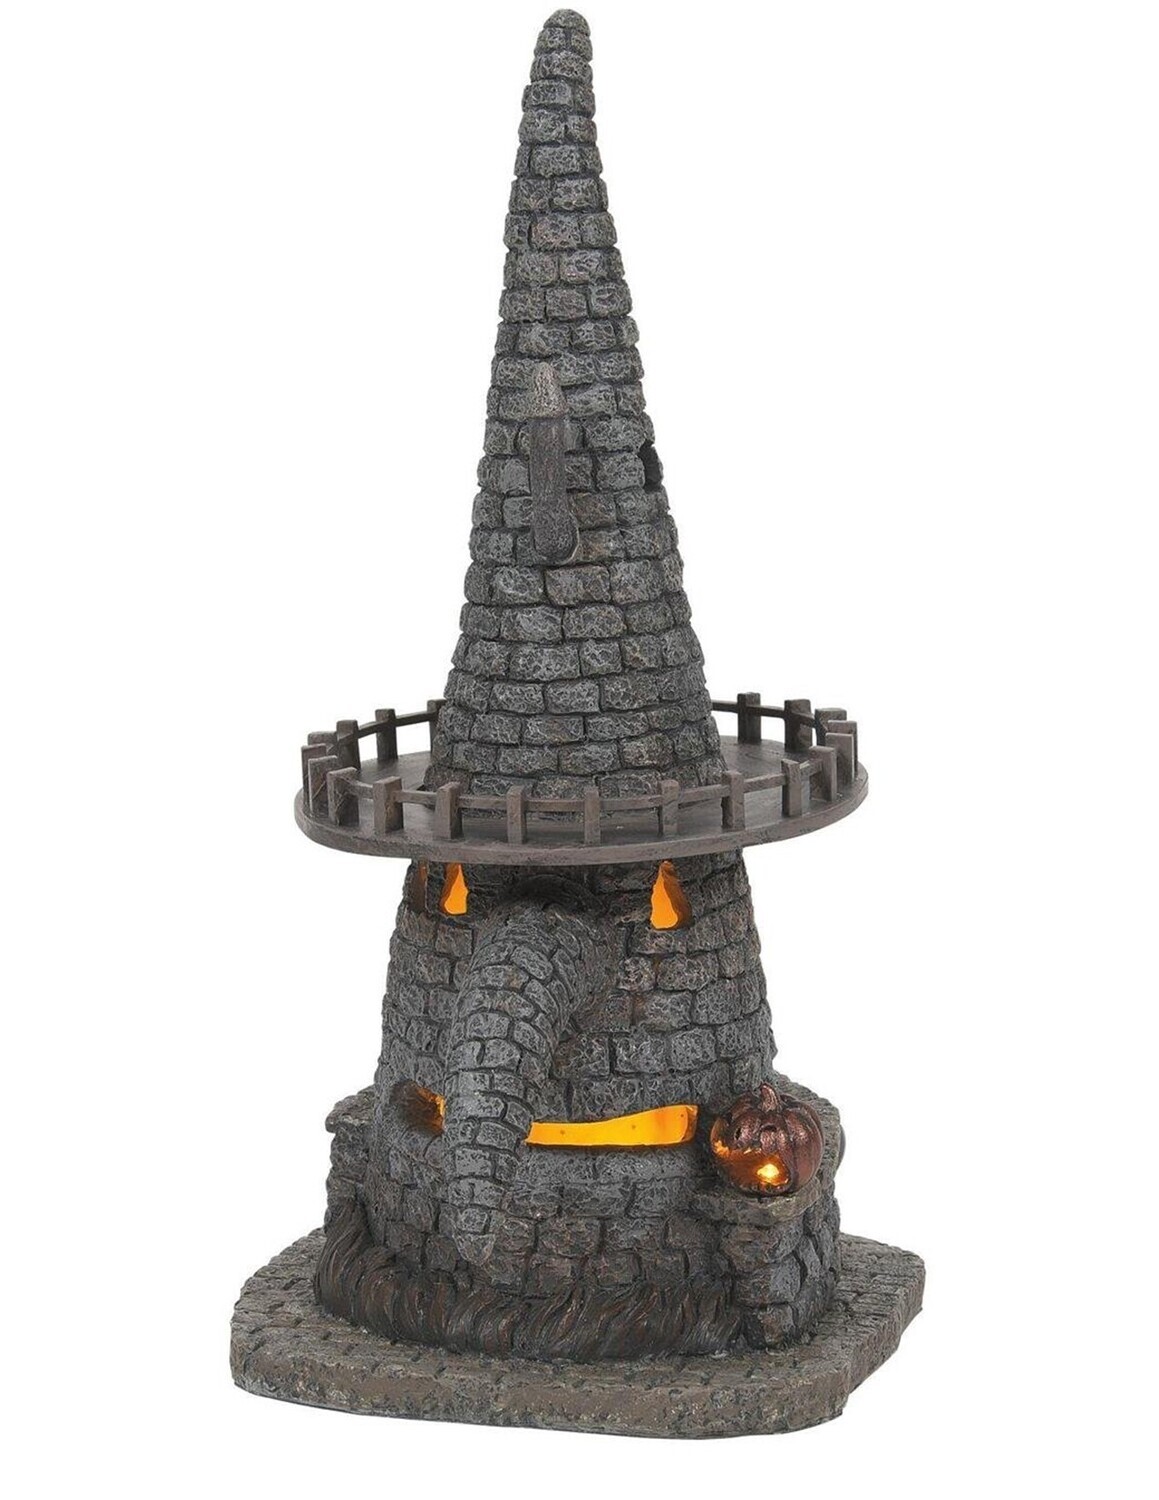 Department 56 The Nightmare Before Christmas Village "Witch Tower" Building (6012291)